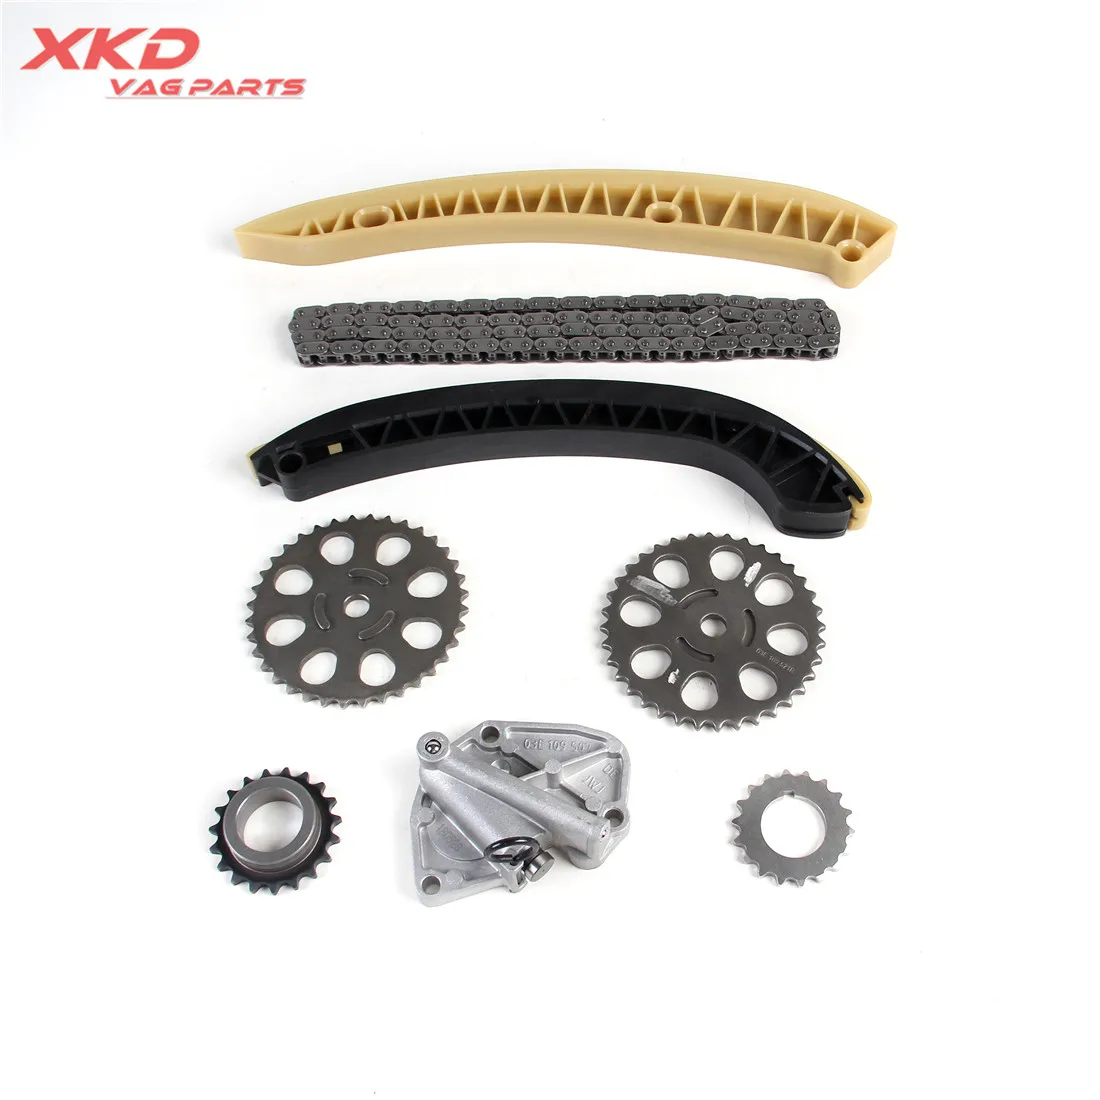 

8Pcs Engine Timing Chain Tensioner Kit Fit For V-W Po-lo SEAT Ibiza SK-ODA Fabia 1.2L 03E 109 229 A 03E 109 469 AZQ BME BZG